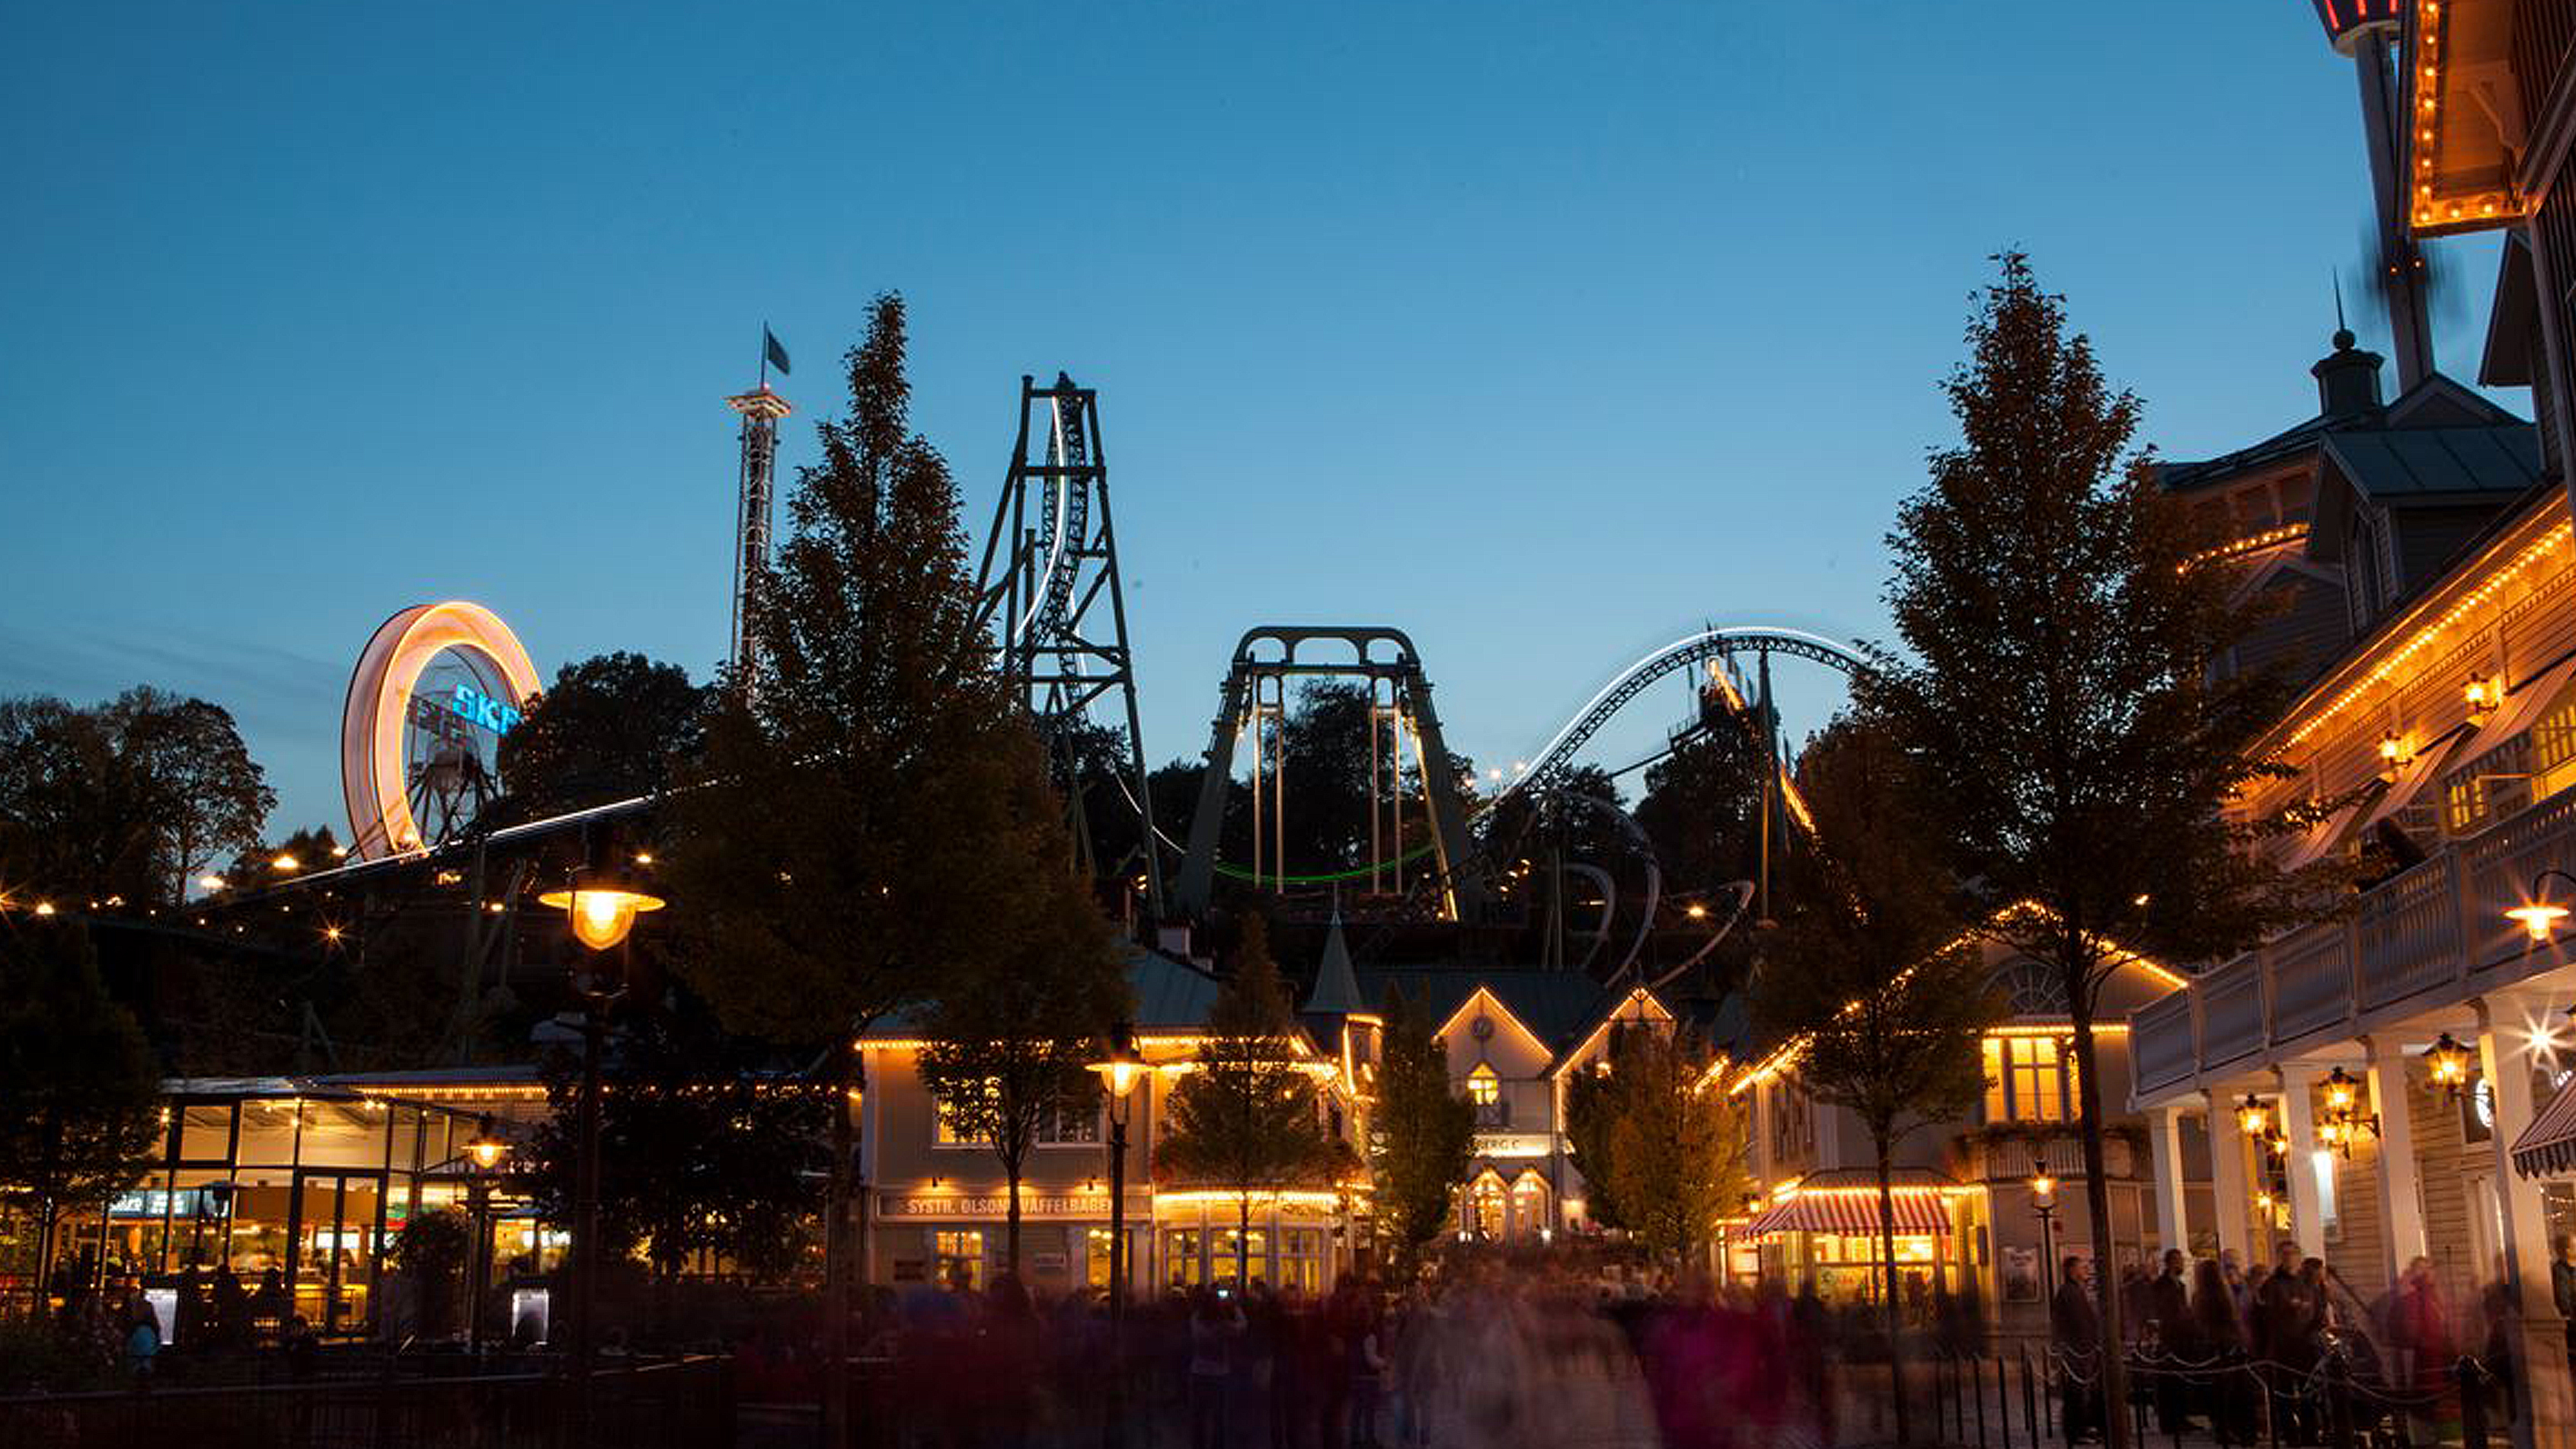 Houses and roller coaster at night